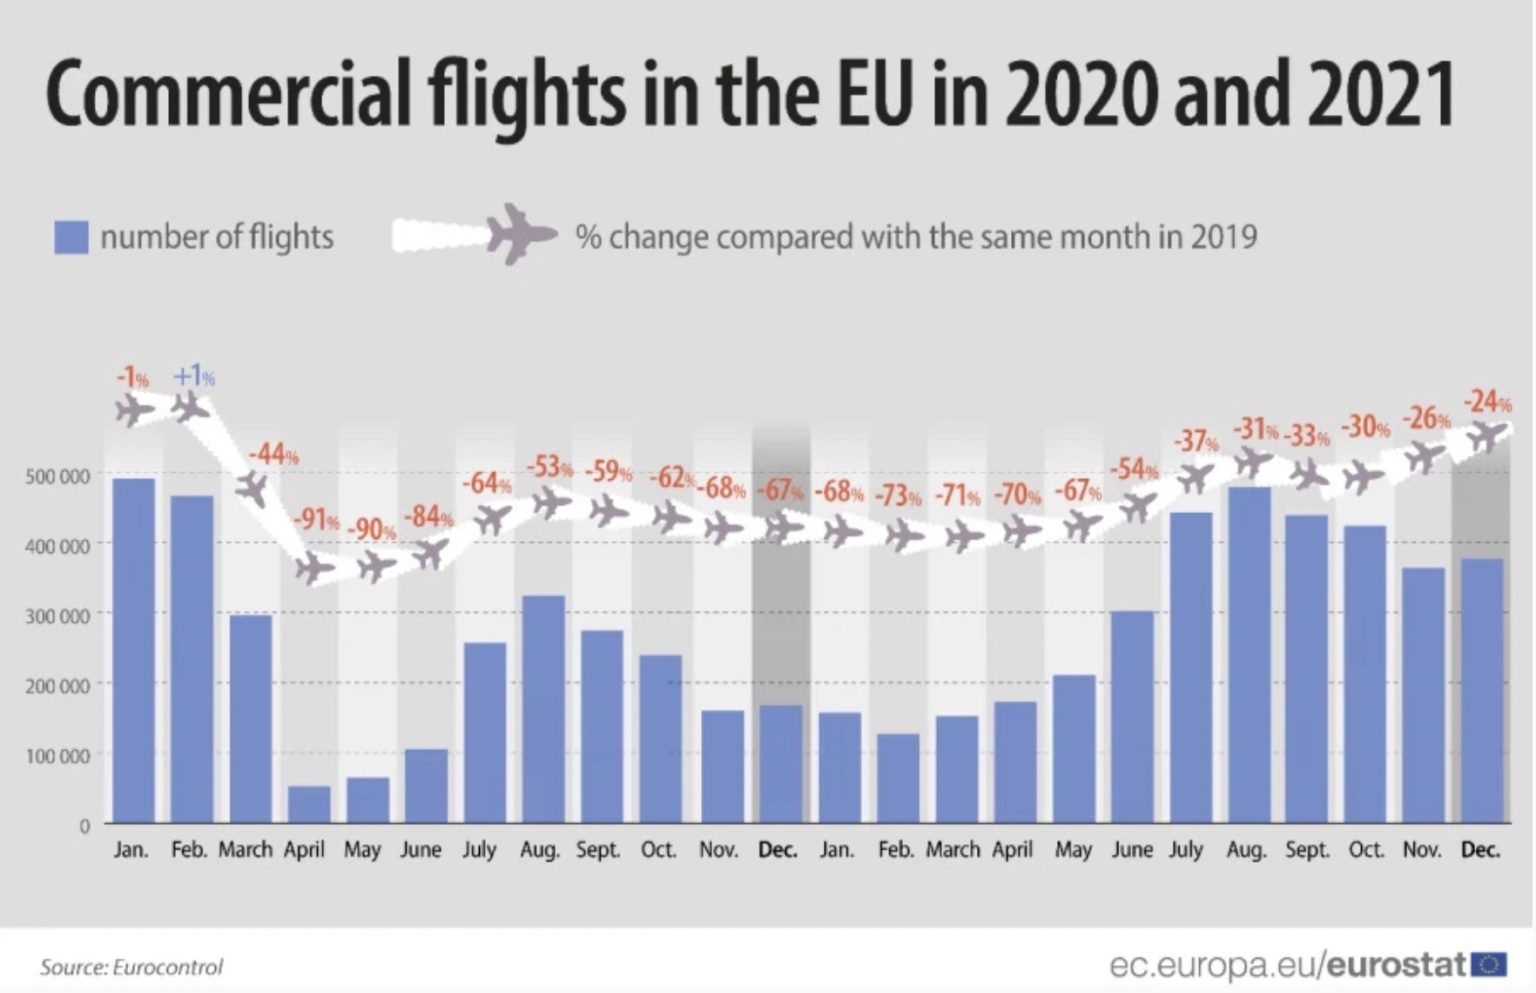 Greece the second best performing country in terms of flight reductions ...